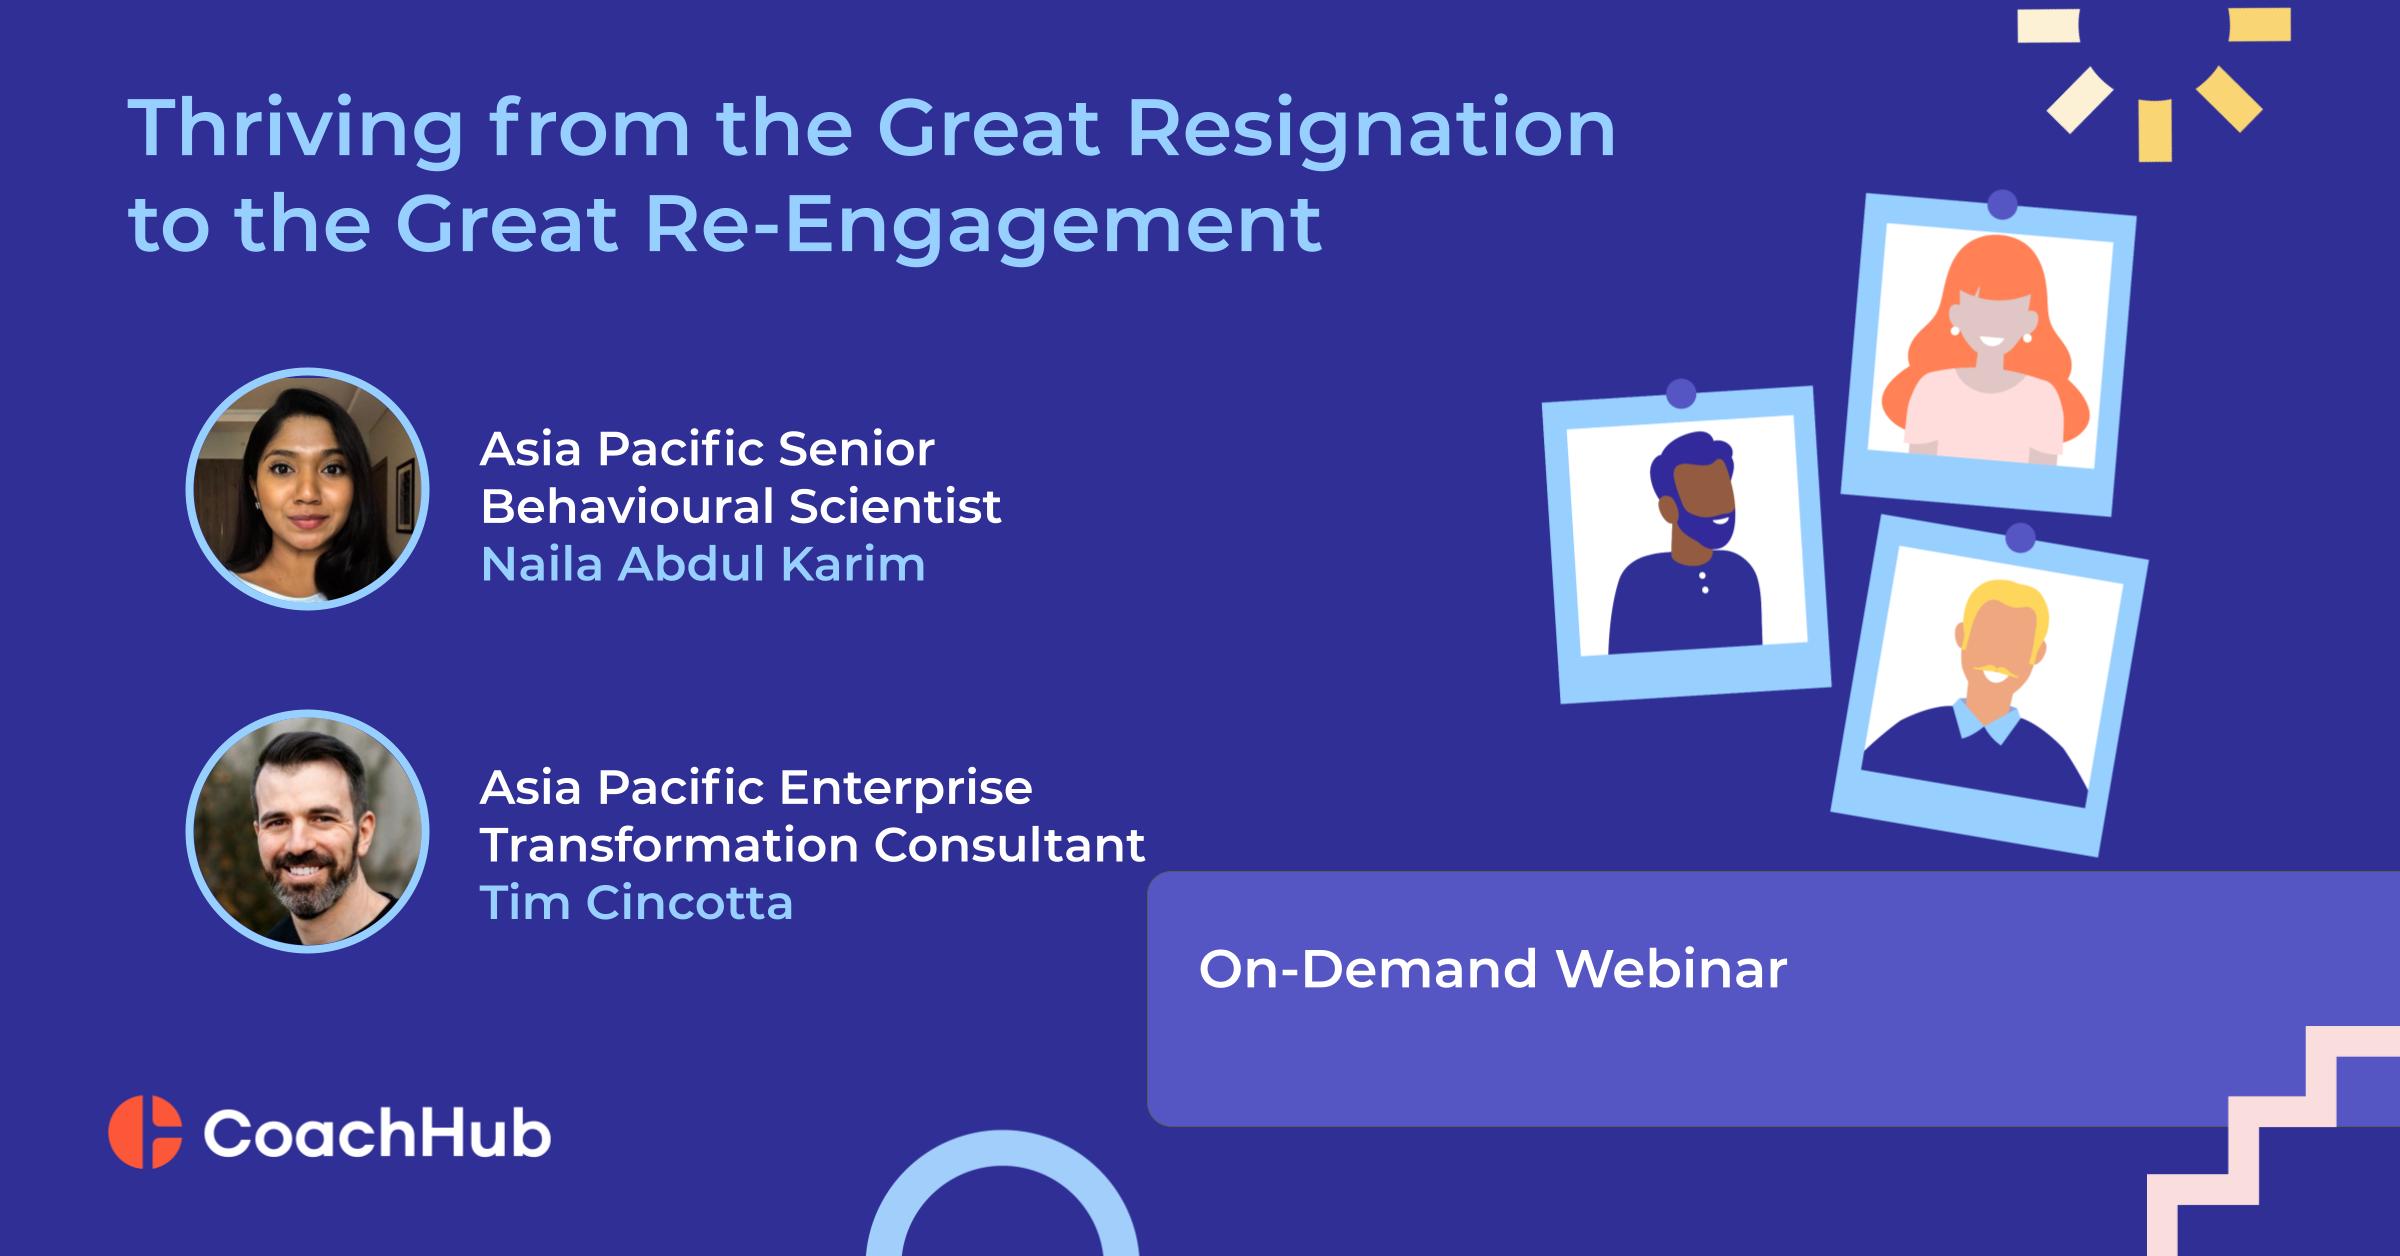 Thriving from the Great Resignation to the Great Re-Engagement